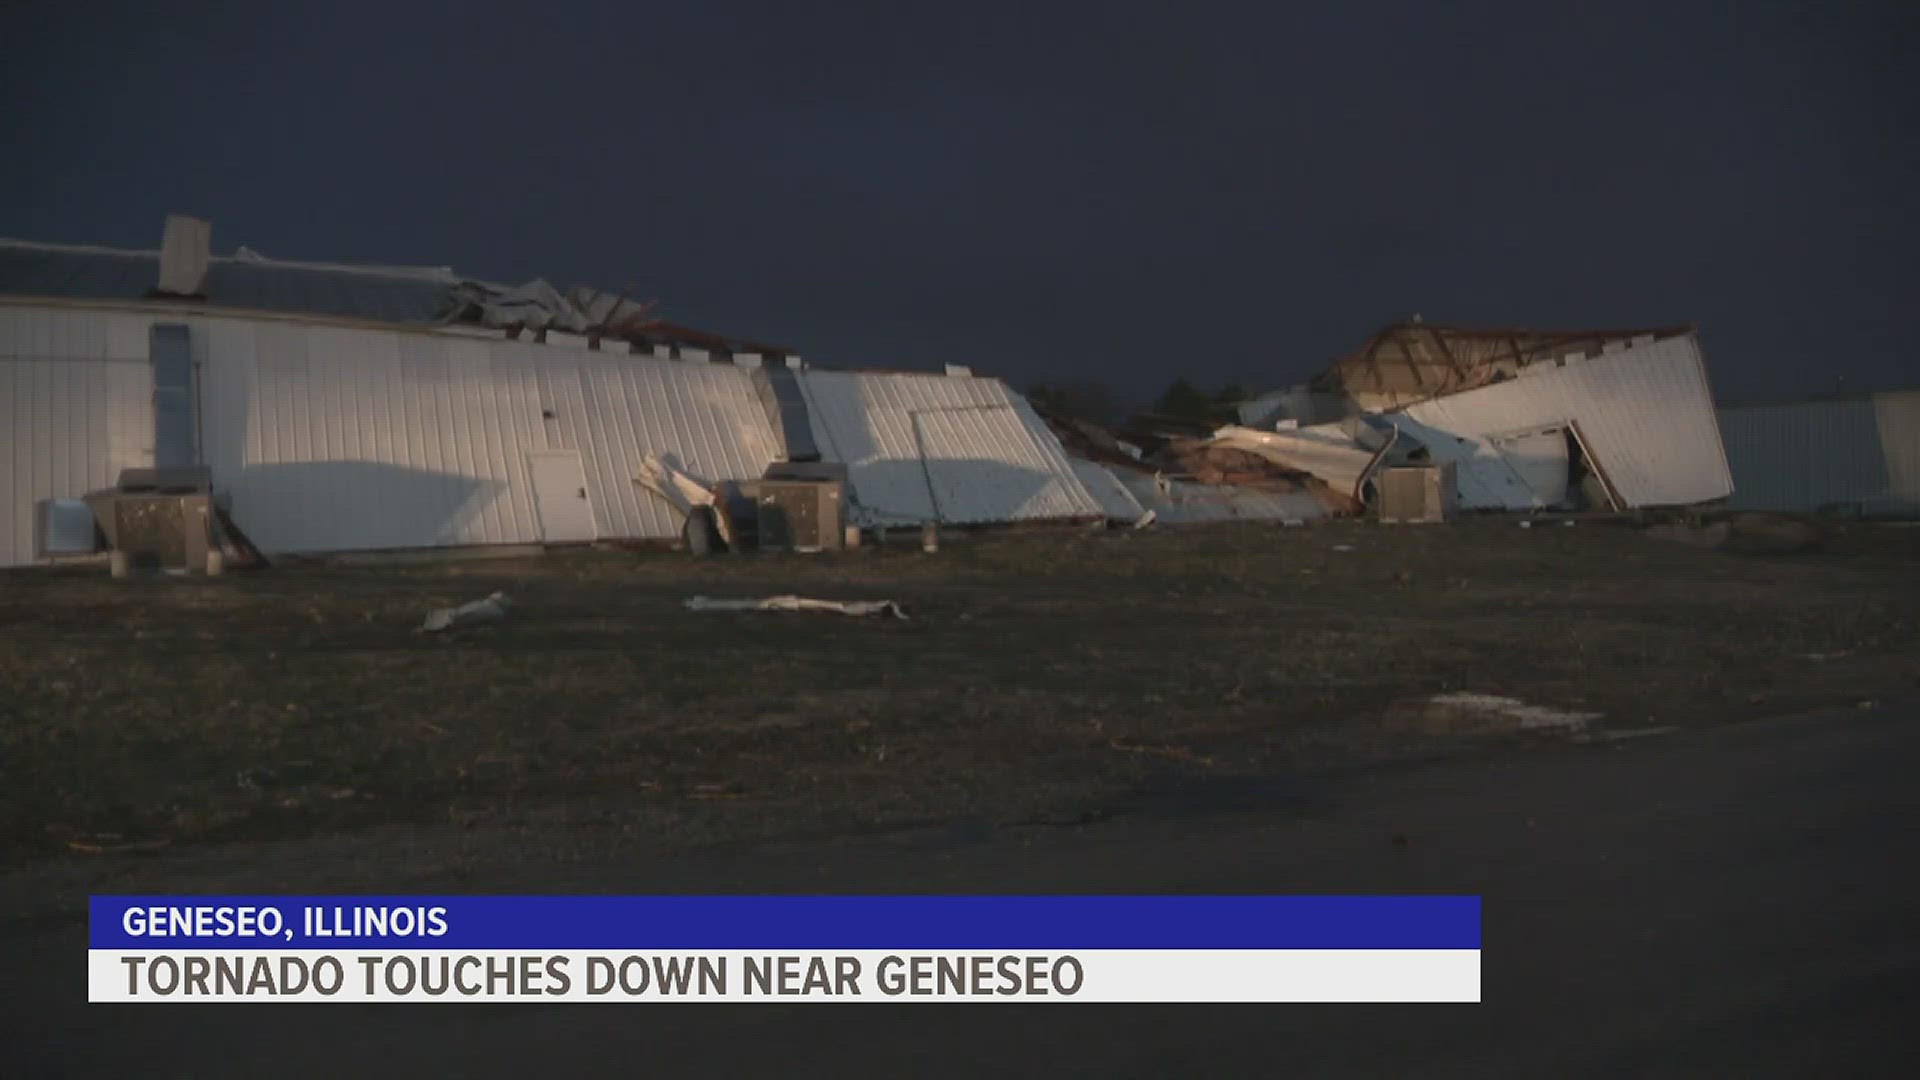 Geneseo PD report a tornado touched down near town for 2 minutes. The National Weather Service has yet to confirm. Two men hid in a pit while the storm blew overtop.